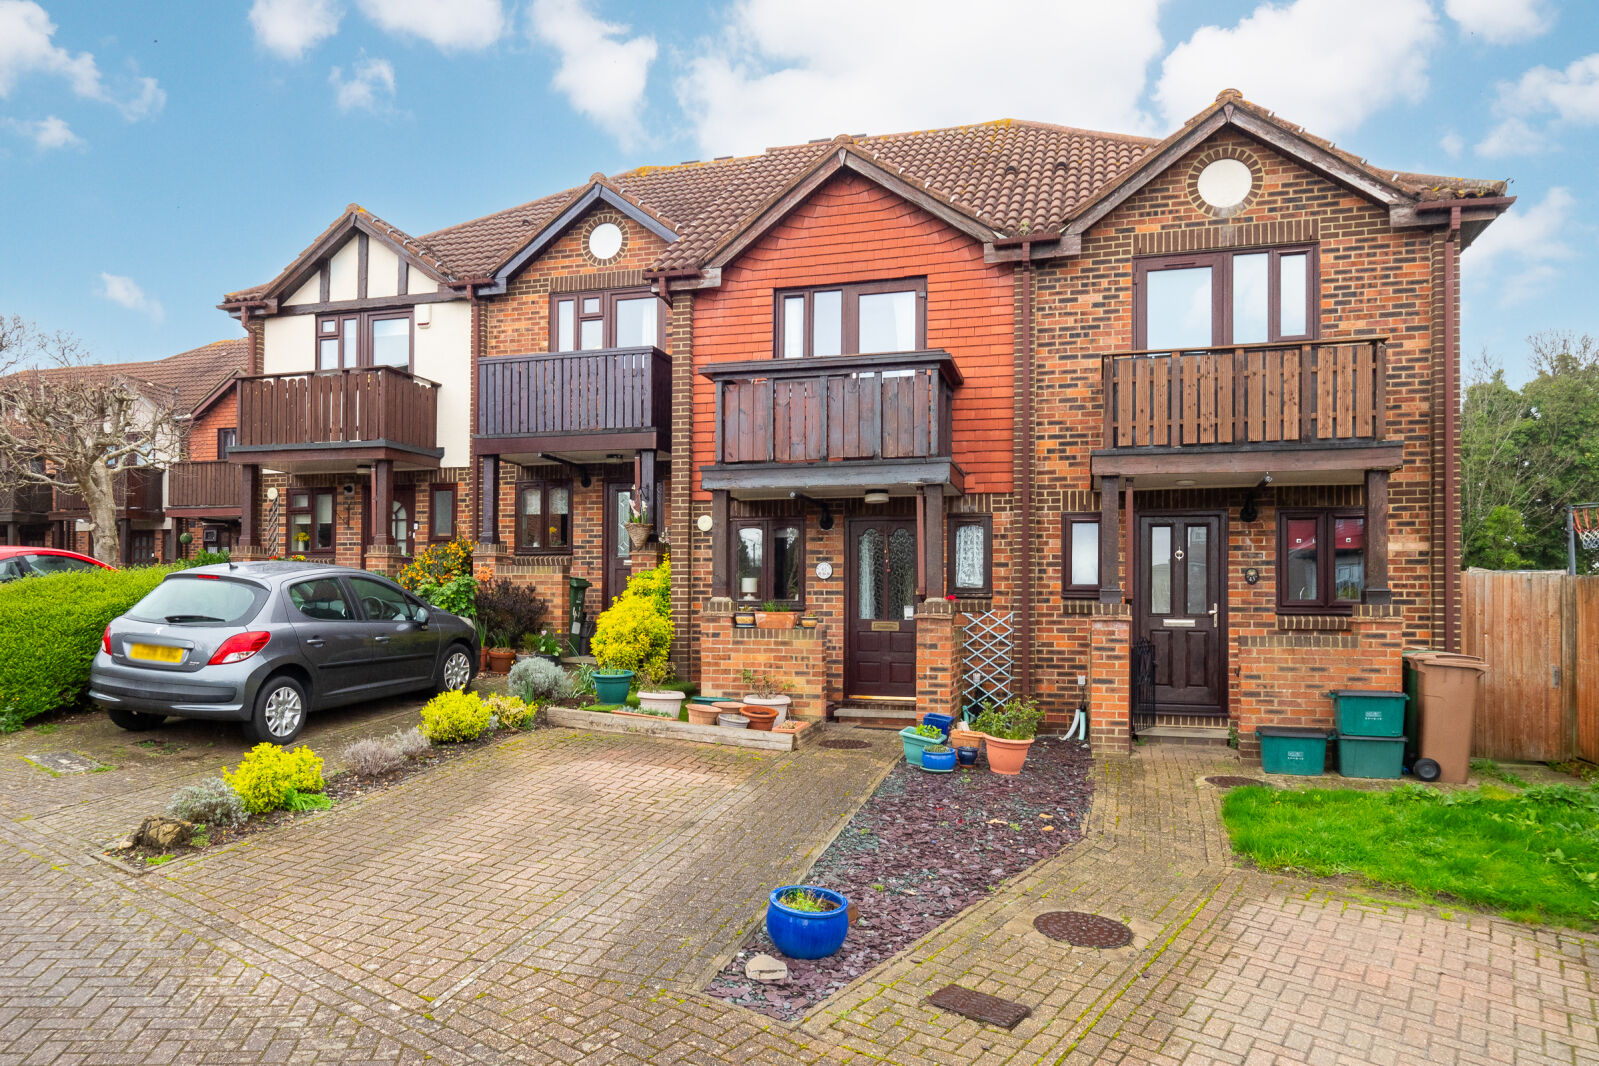 2 bedroom mid terraced house for sale Alpine View, Carshalton, SM5, main image